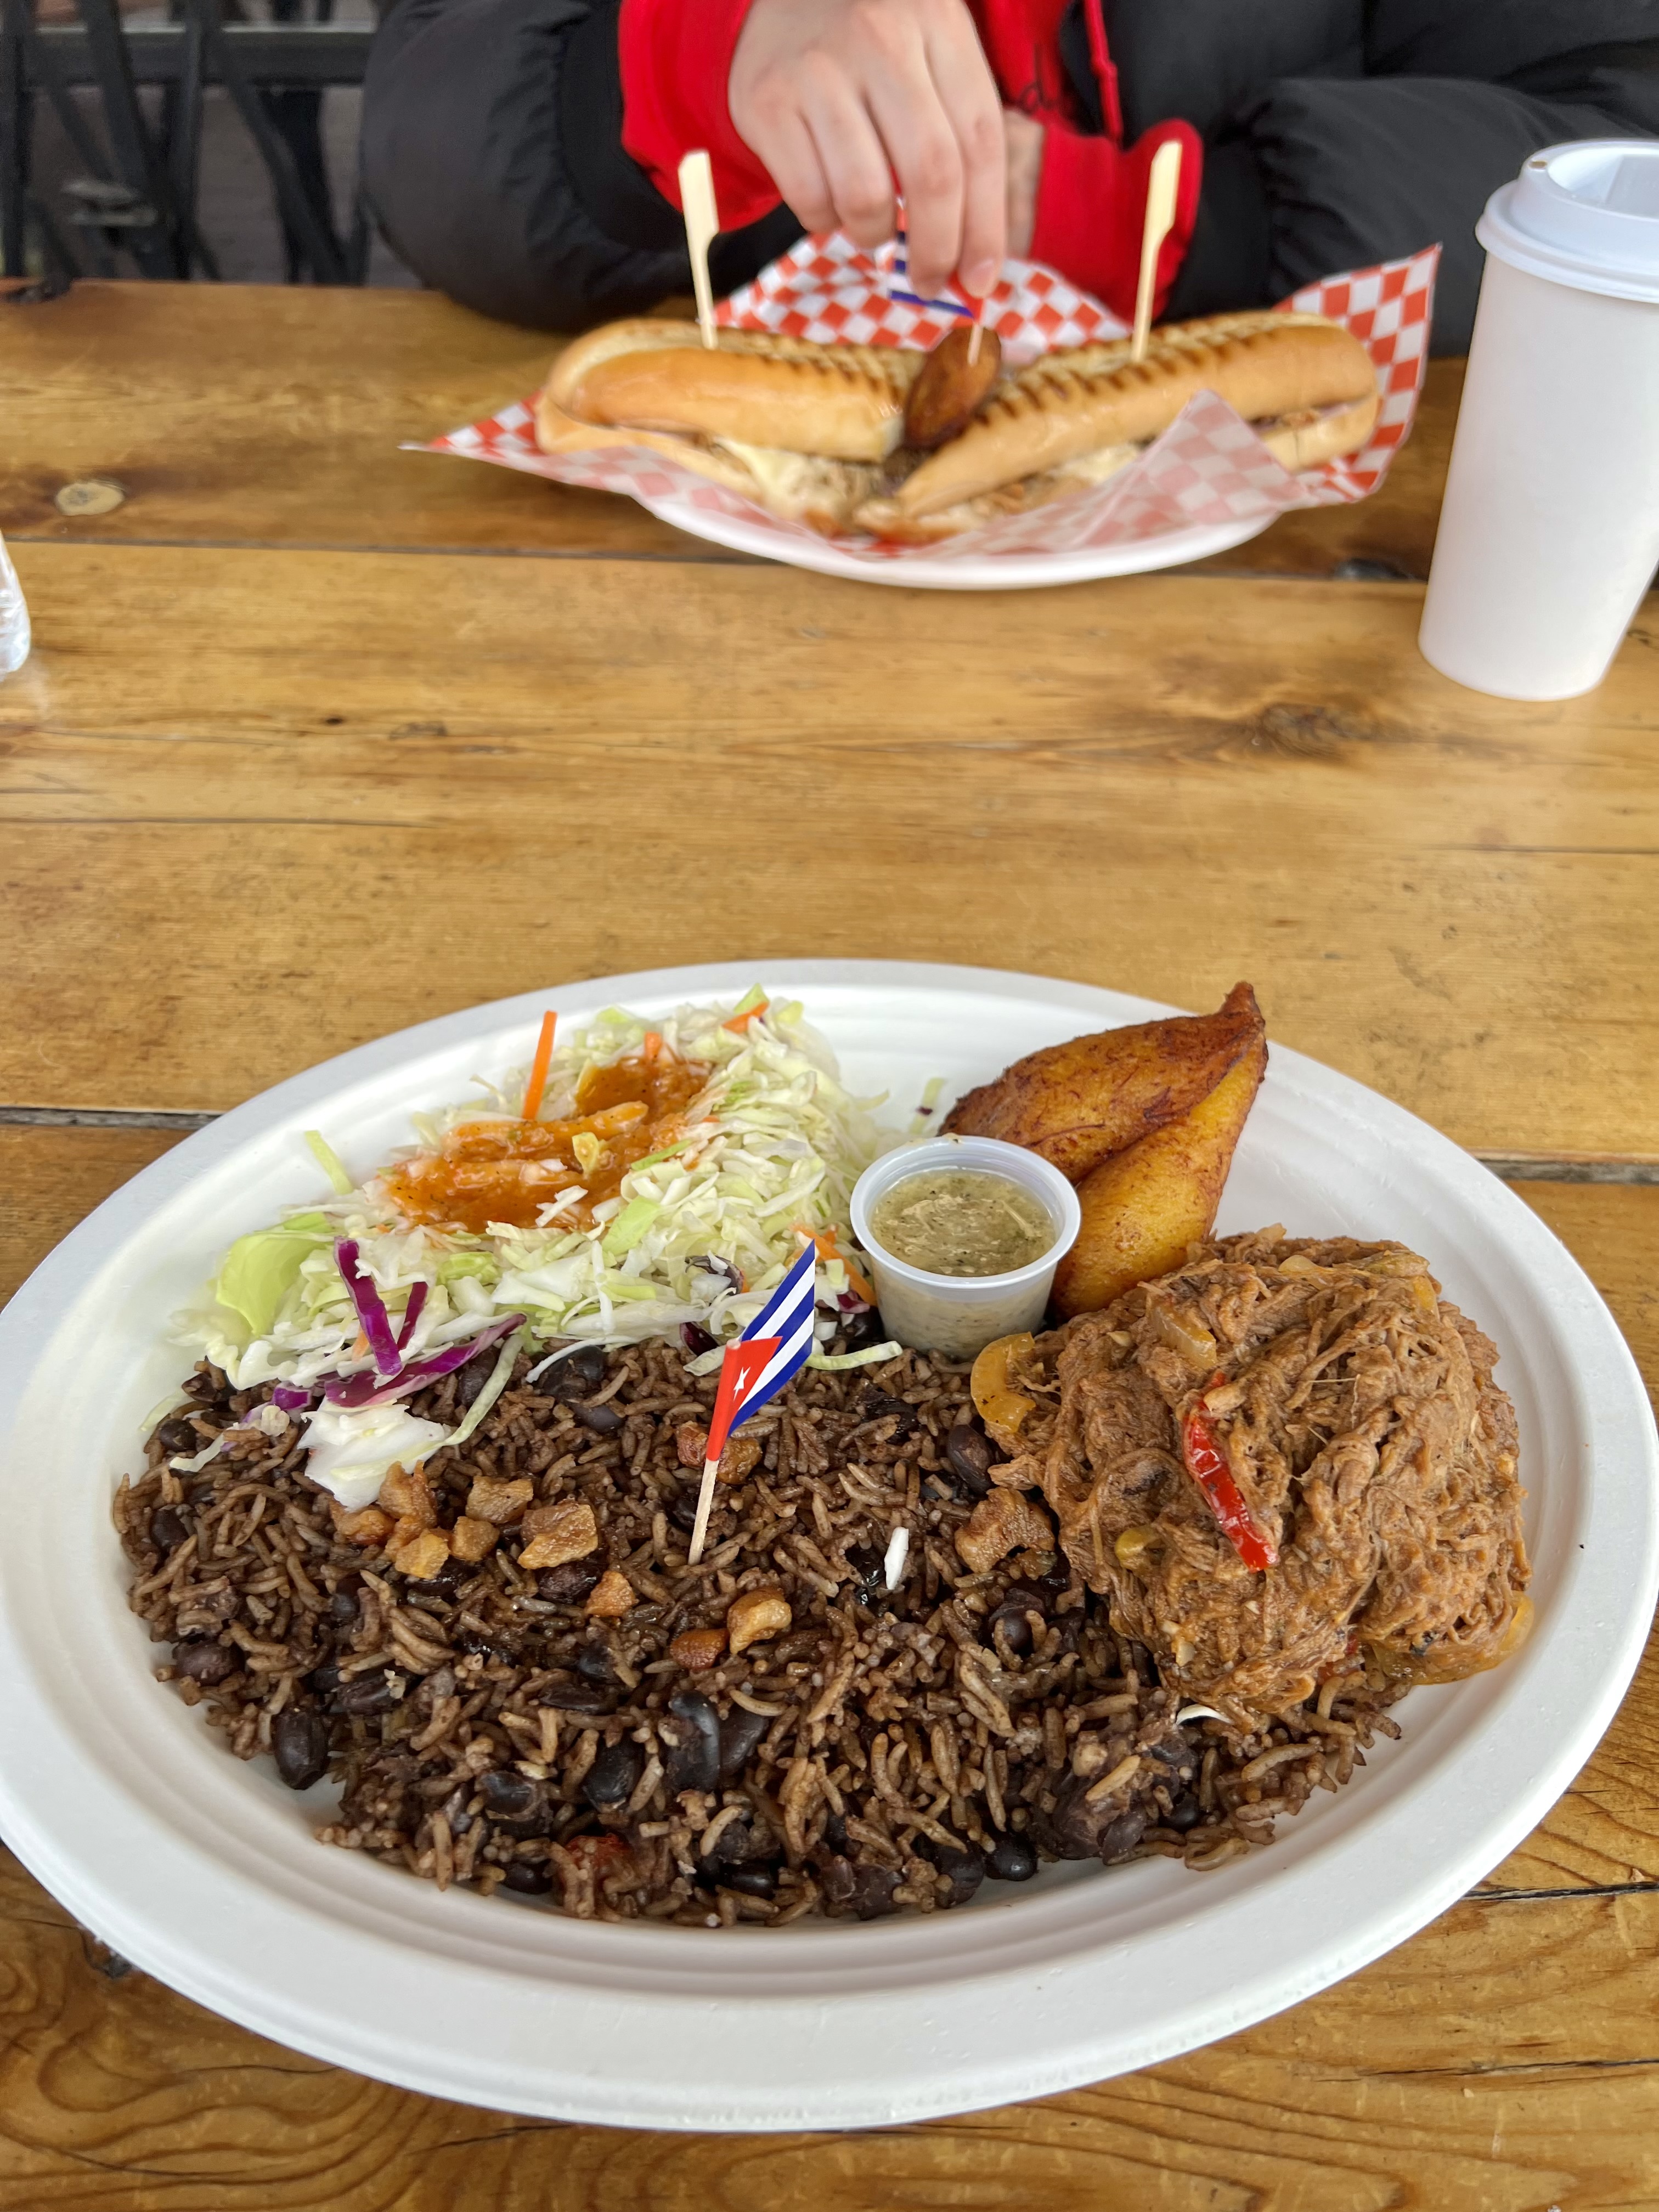 A plate of Ropa Vieja from Havana Station in Portland, with rice and a salad.